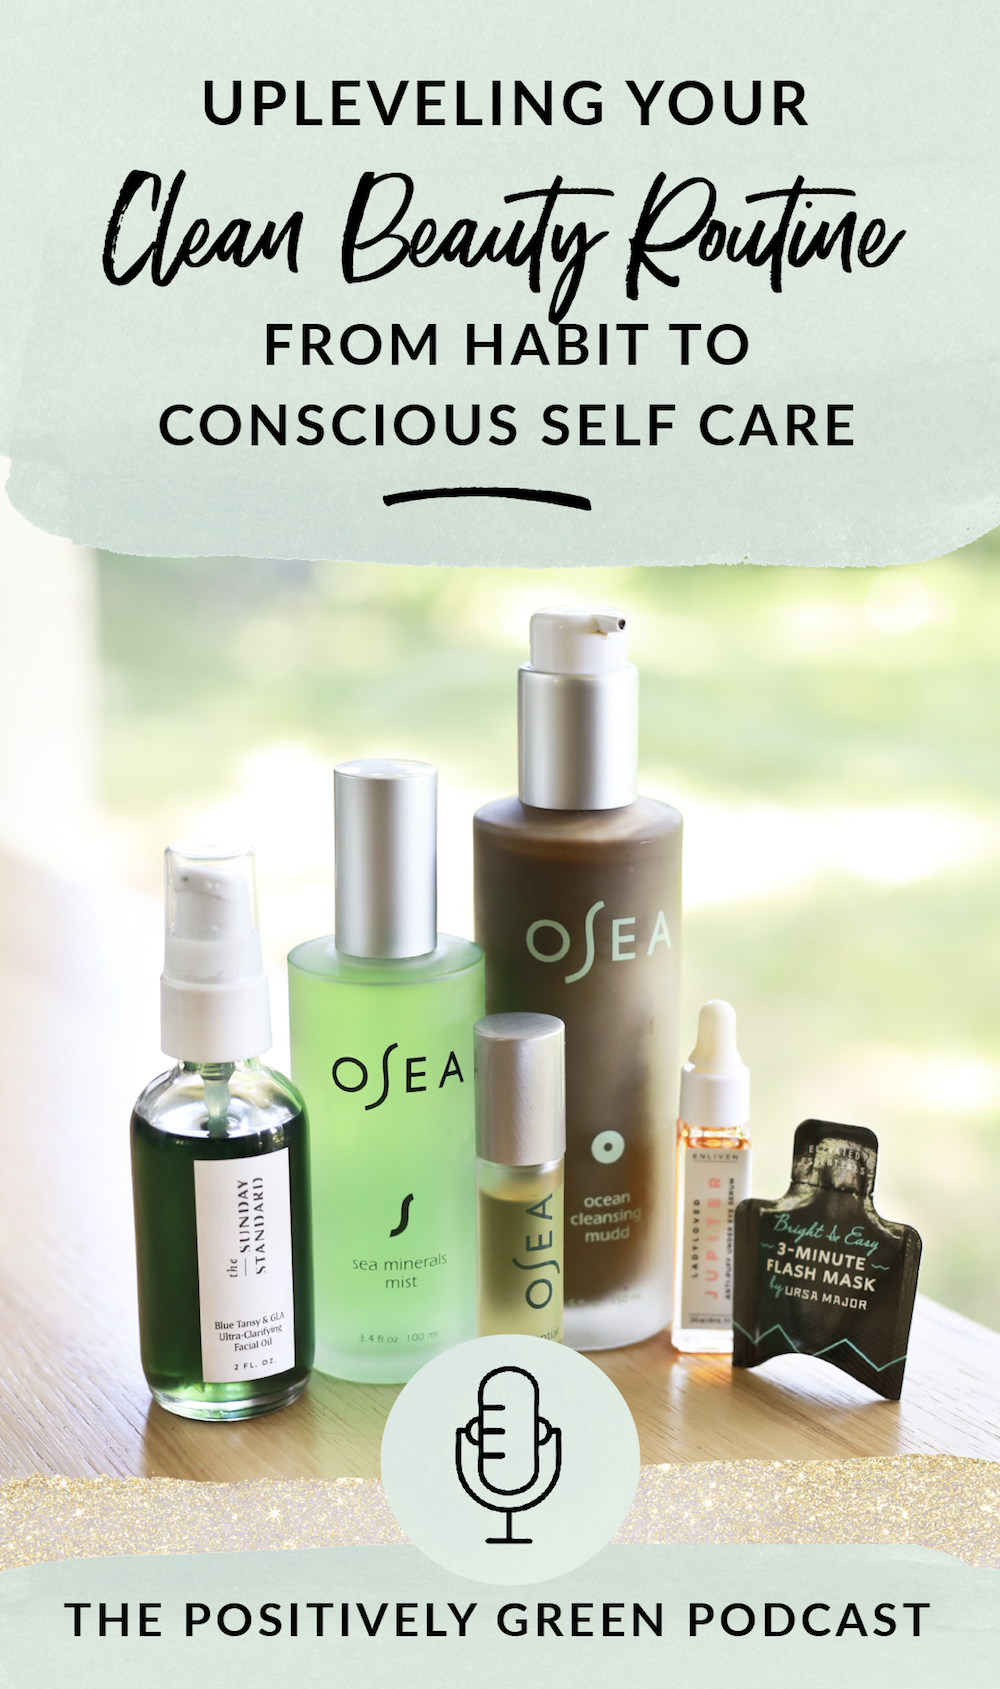 How to uplevel your clean beauty routine from habit to conscious self-care Episode 20 the Positively Green Podcast with Becca Tetzlaff and Kelsey Jorissen